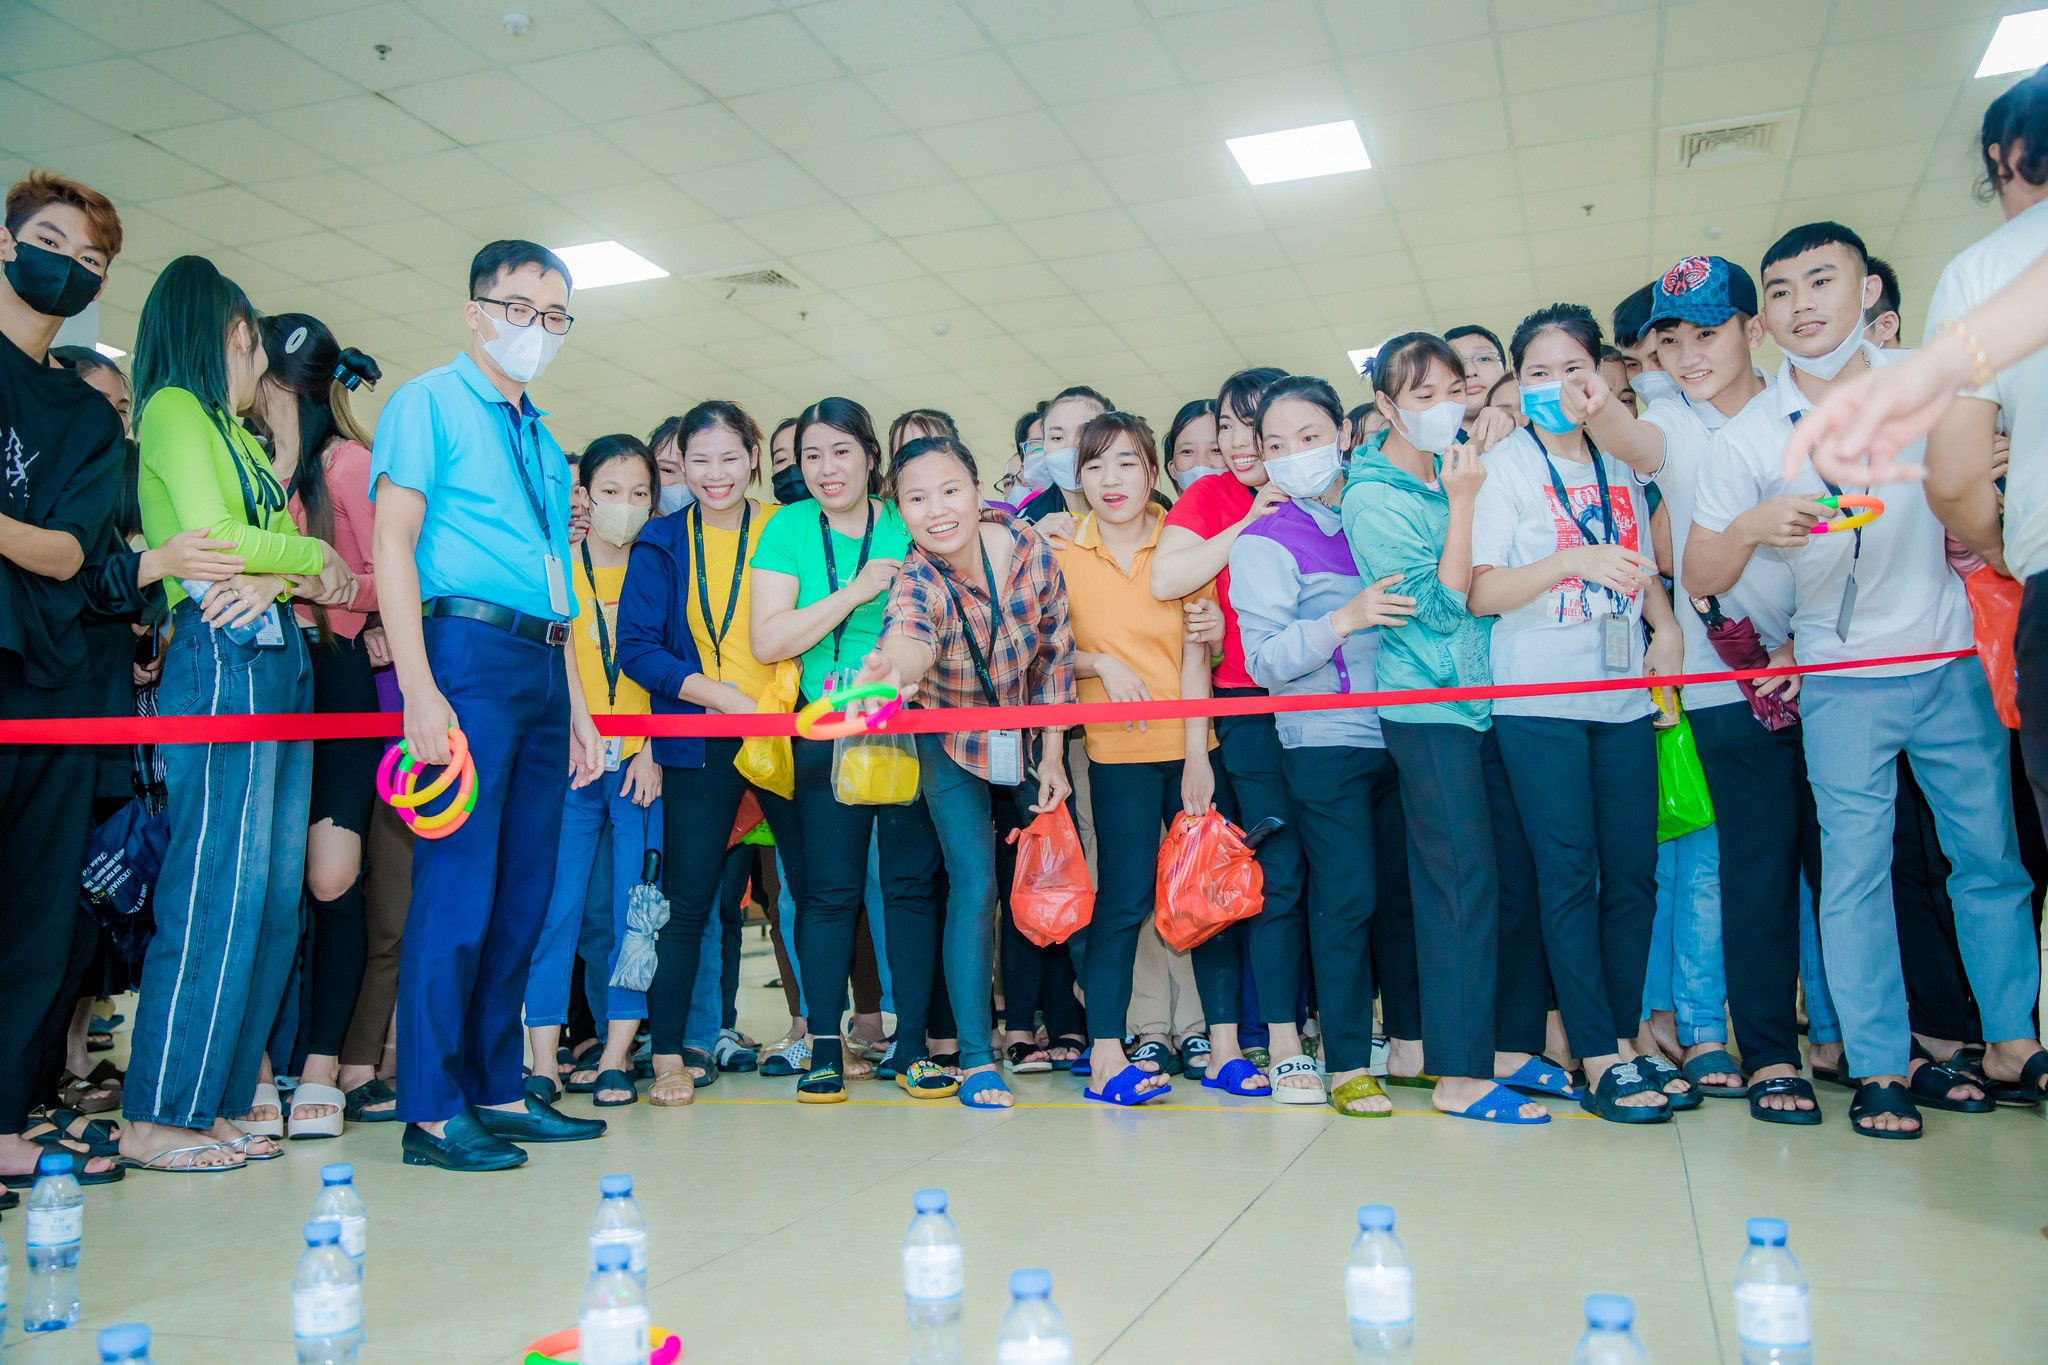 bna-nguoi-lao-dong-cong-ty-luxshare-ict-tham-gia-mot-su-kien-cua-cong-ty-anh-quoc-viet-1-282.jpeg